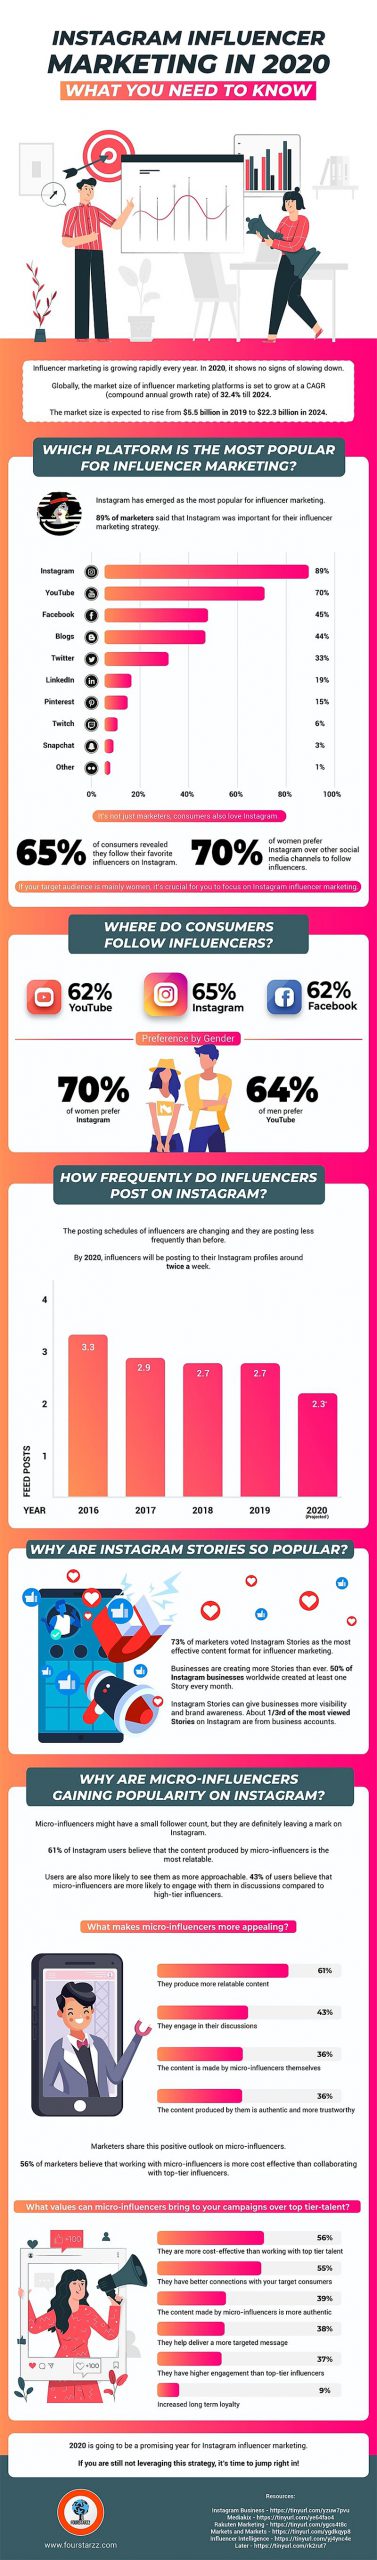 40 instagram influencer marketing stats to guide your strategy in 2020 infographic scaled 1